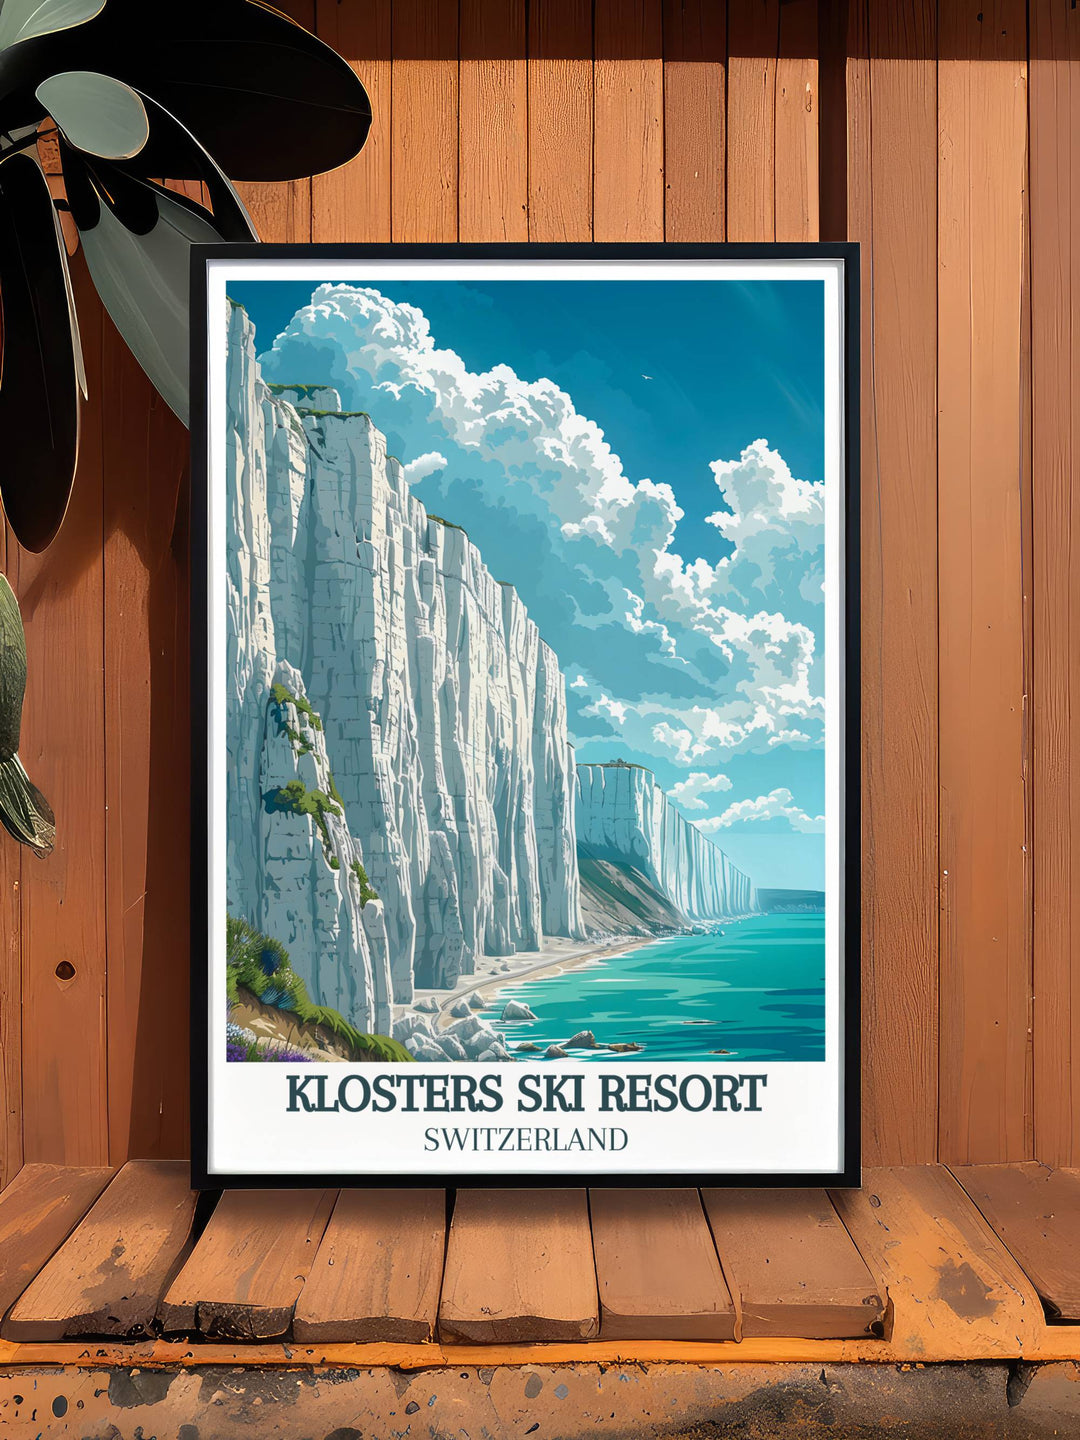 Enhance your decor with our White Cliffs of Dover poster showcasing the cliffs serene beauty. This travel print is a wonderful way to bring the calm and elegance of the White Cliffs of Dover into your home. Great for creating a peaceful and stylish atmosphere